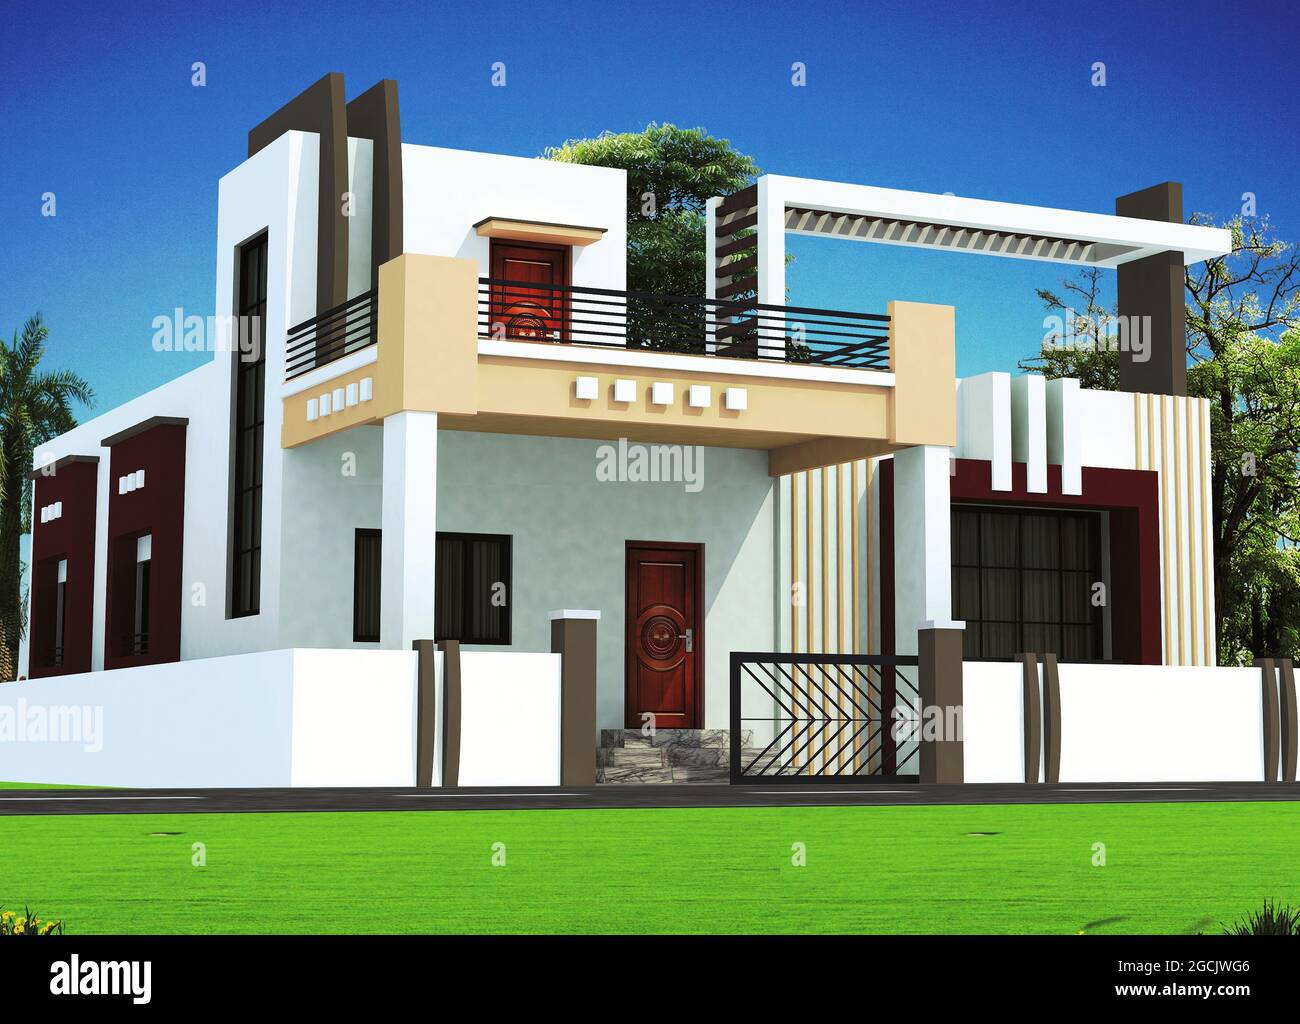 3D rendering of a house exterior design withan open gate Stock ...